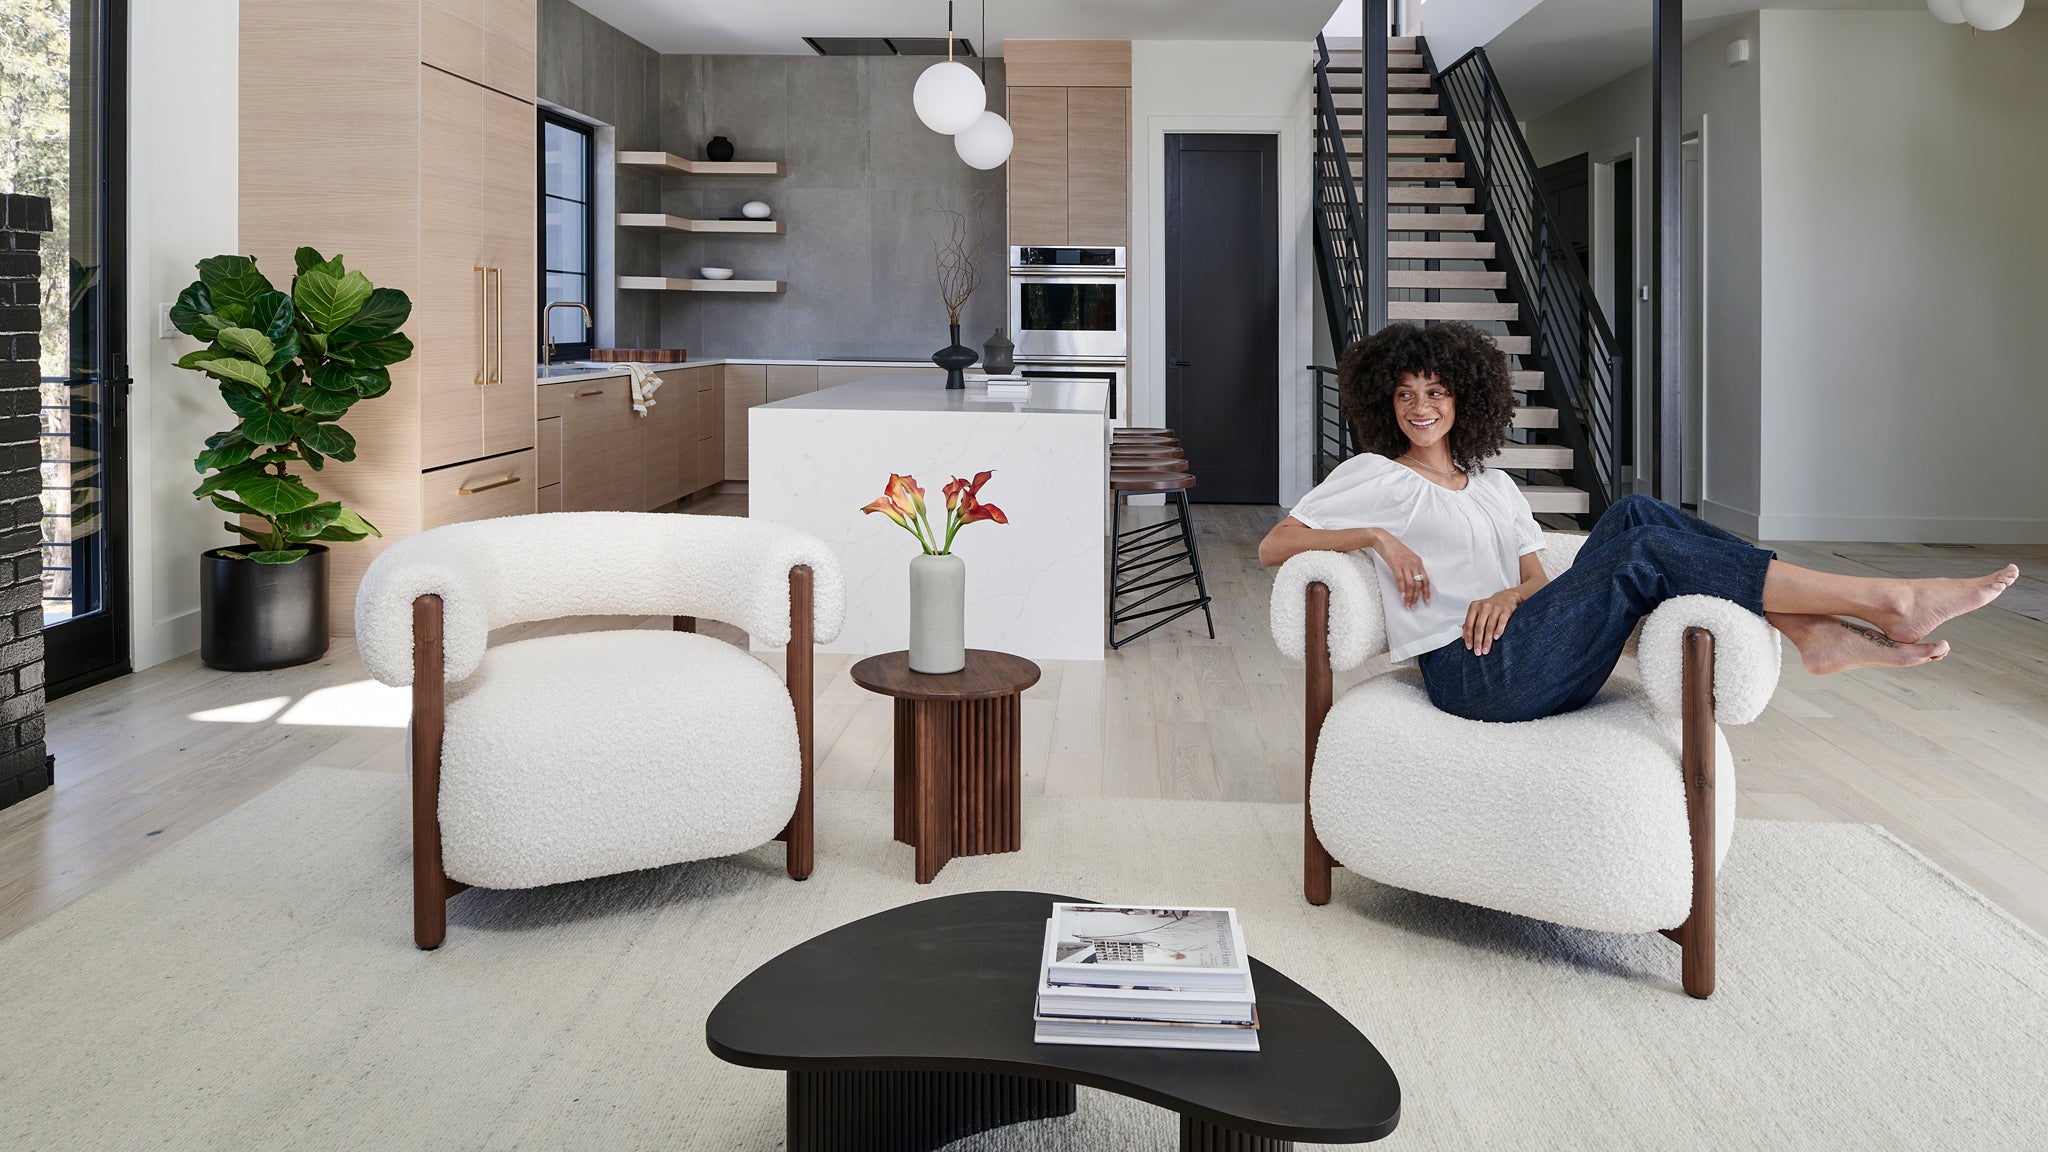 A joyful woman lounges in a chic, modern living room with stylish furniture and bright decor.